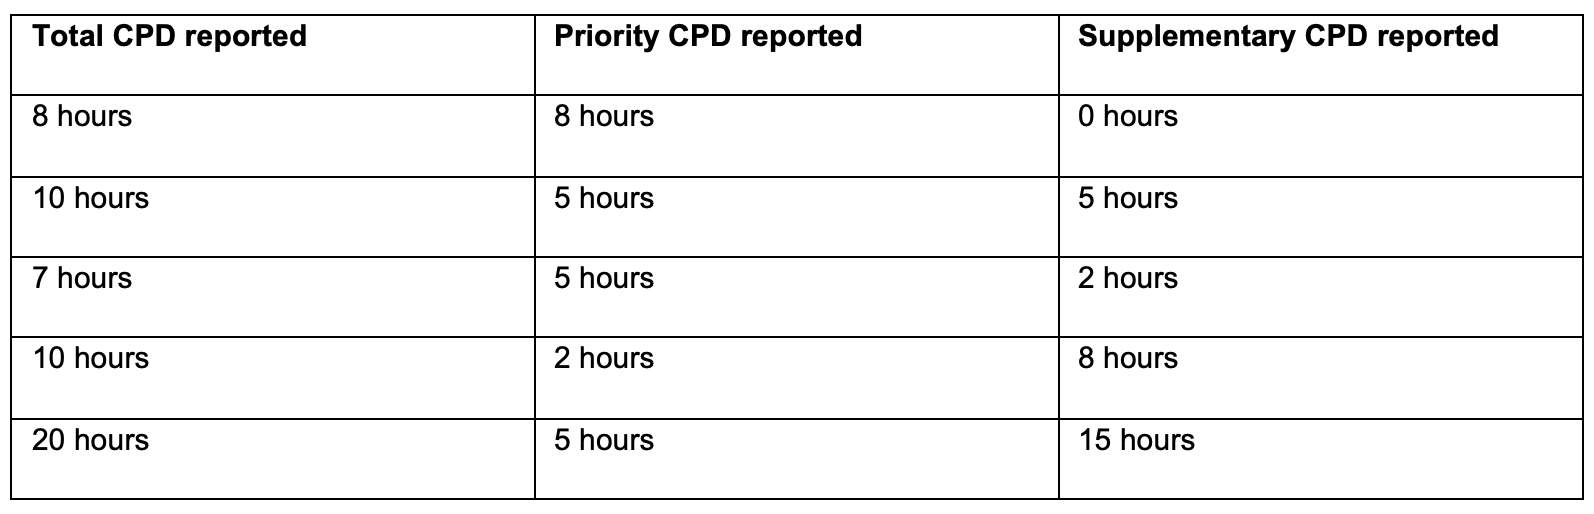 If your CPD target is 10 hours, you can demonstrate non-compliance as follows